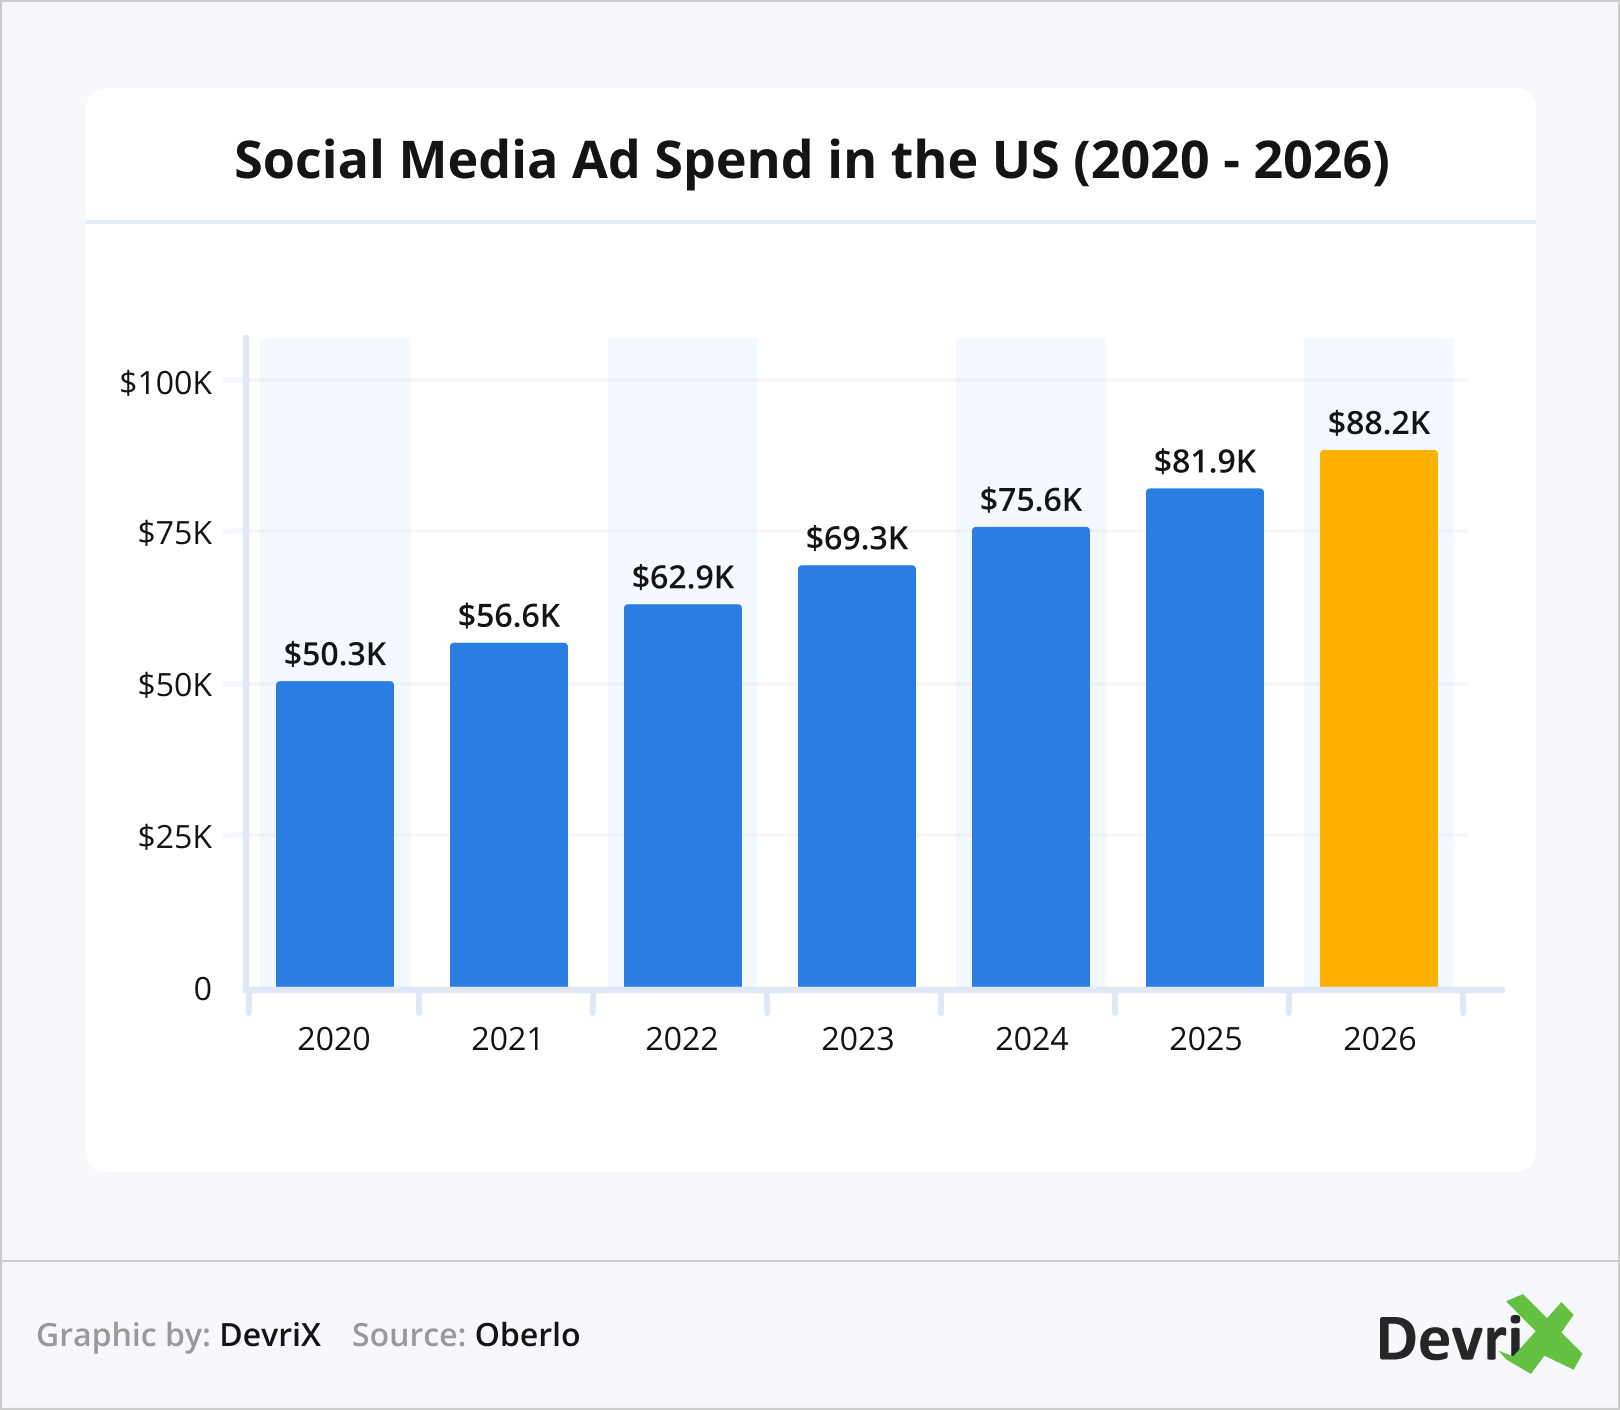 Social Media Ad Spend in the US (2020 - 2026)